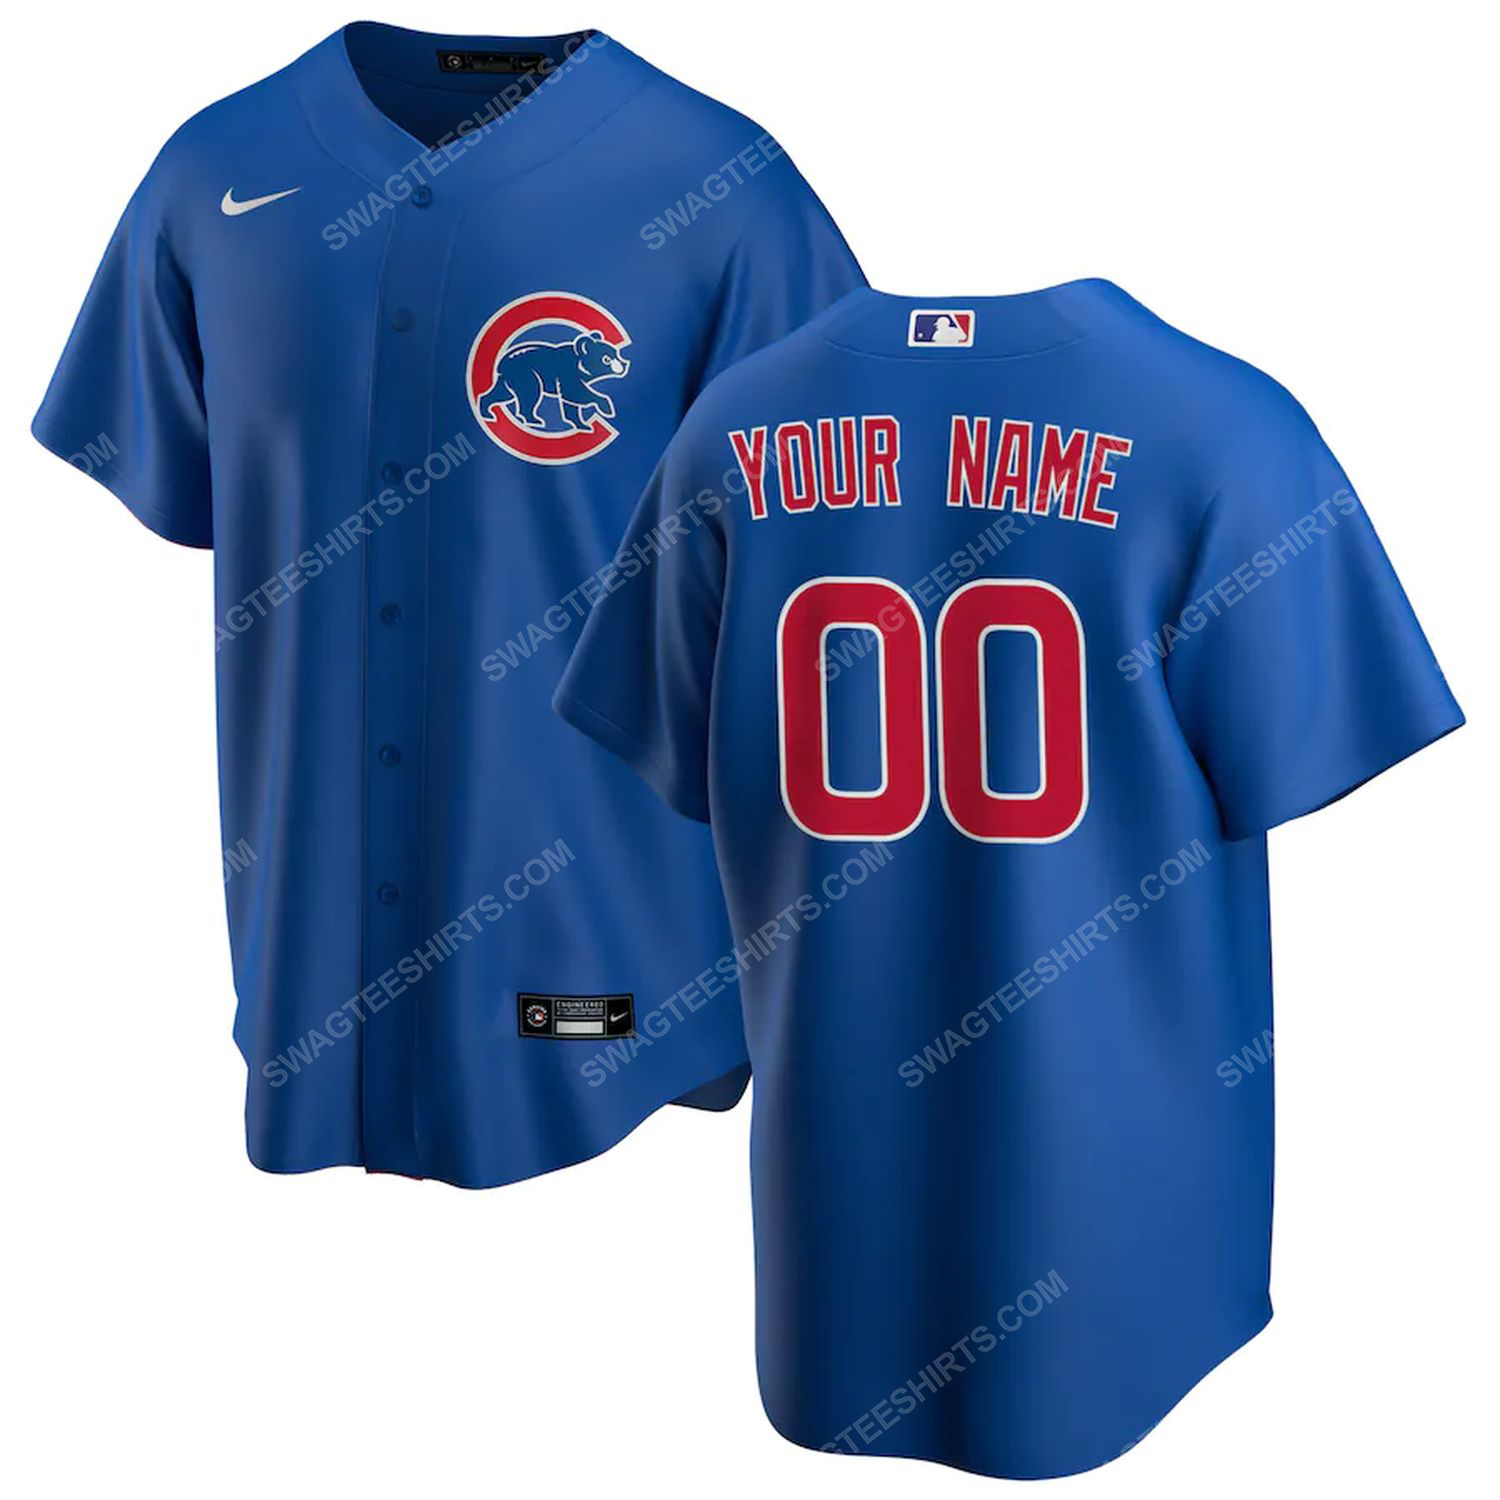 [special edition] Personalized mlb chicago cubs team baseball jersey – maria